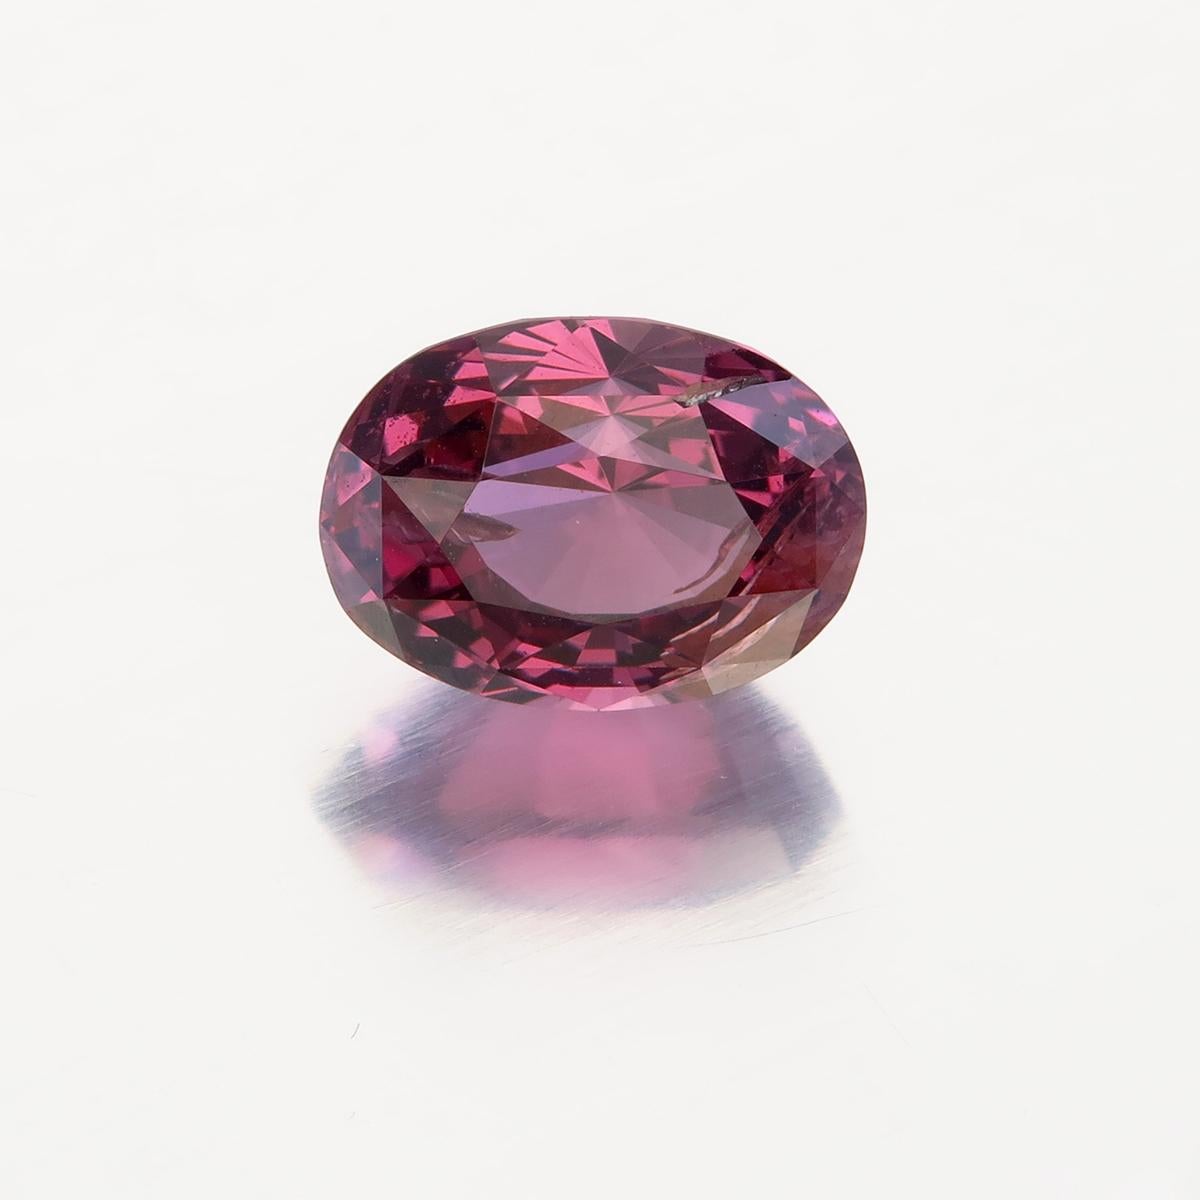 1.87 Carat Pink Spinel from Sri Lanka
Shape: Oval
Cutting Style: Faceted Brilliant Modified Step
Dimensions: 8.10 x 5.95 x 5.06 mm
Color: Pink intense saturation with a medium tone
Weight: 1.87 Carat
No Heat or treatment
Lotus report: 7965-2587
Sri